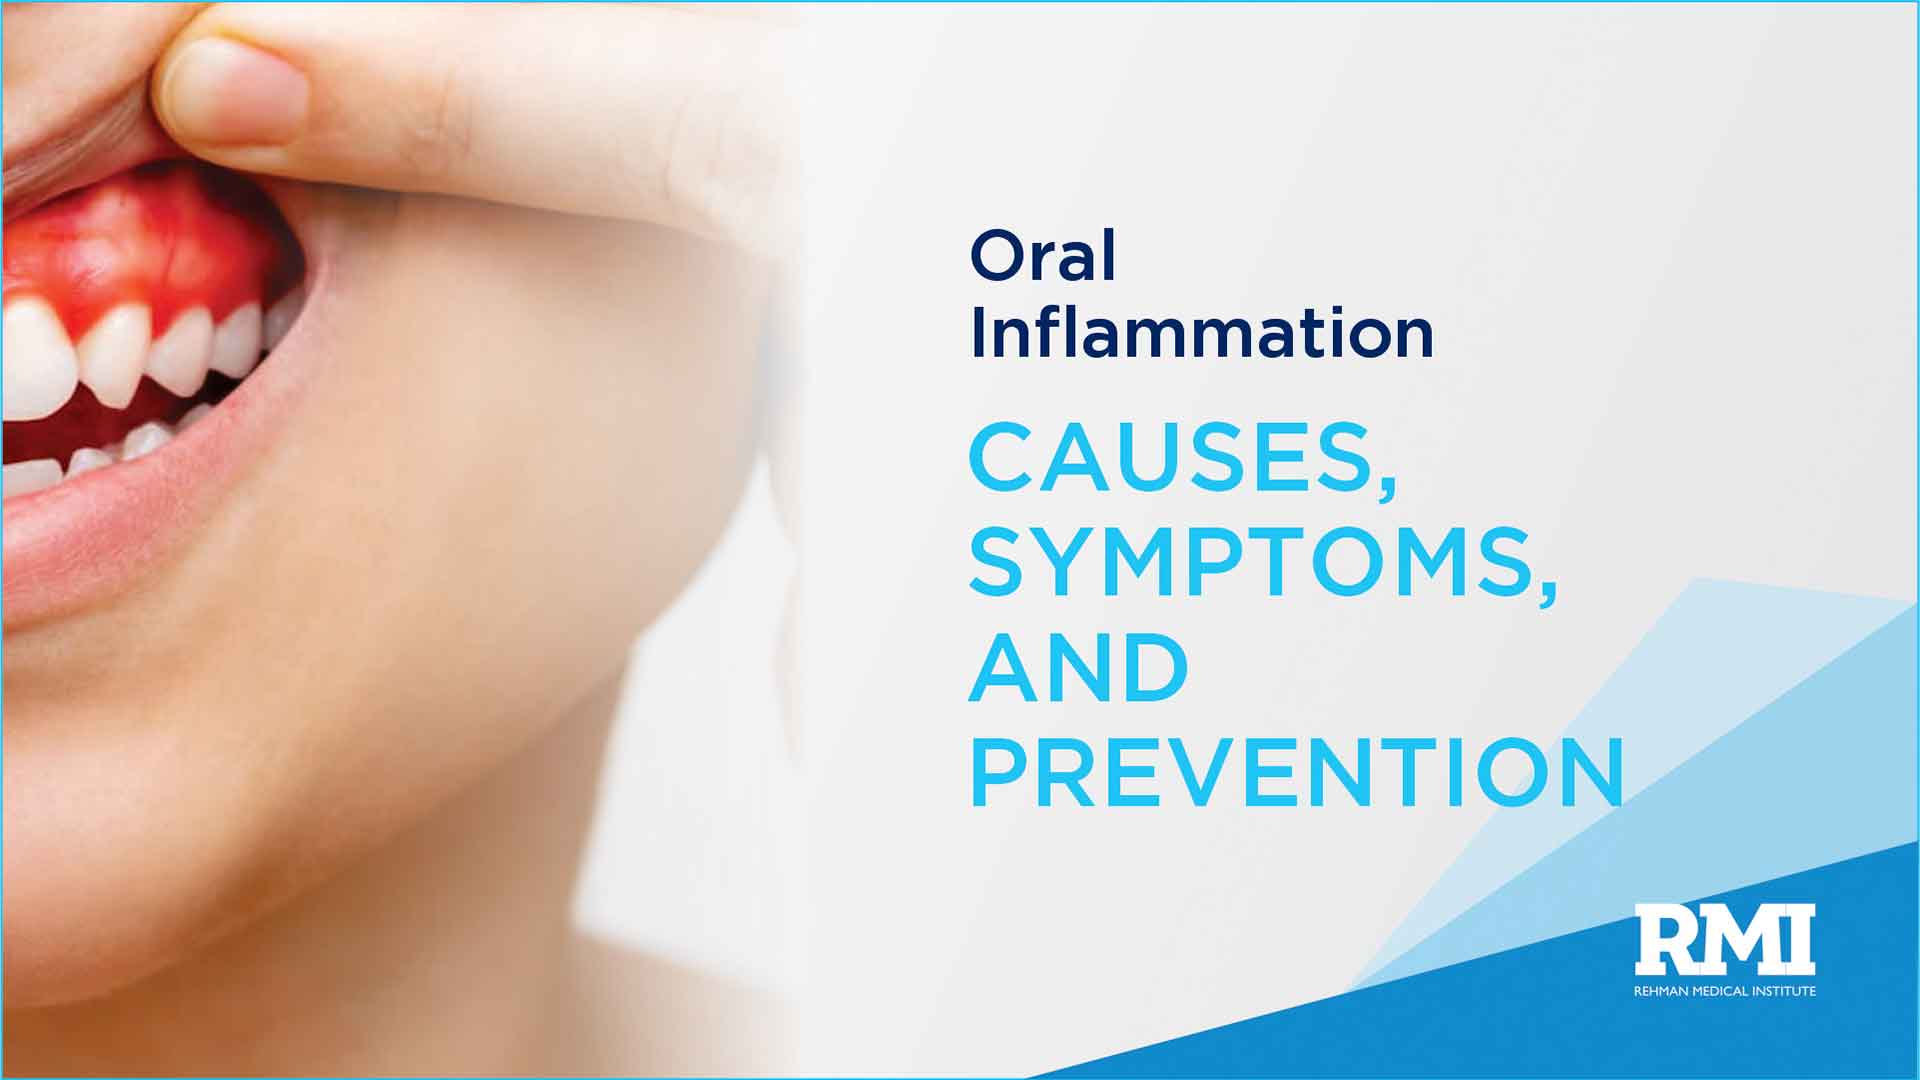 Oral Inflammation: Causes, Symptoms, and Prevention